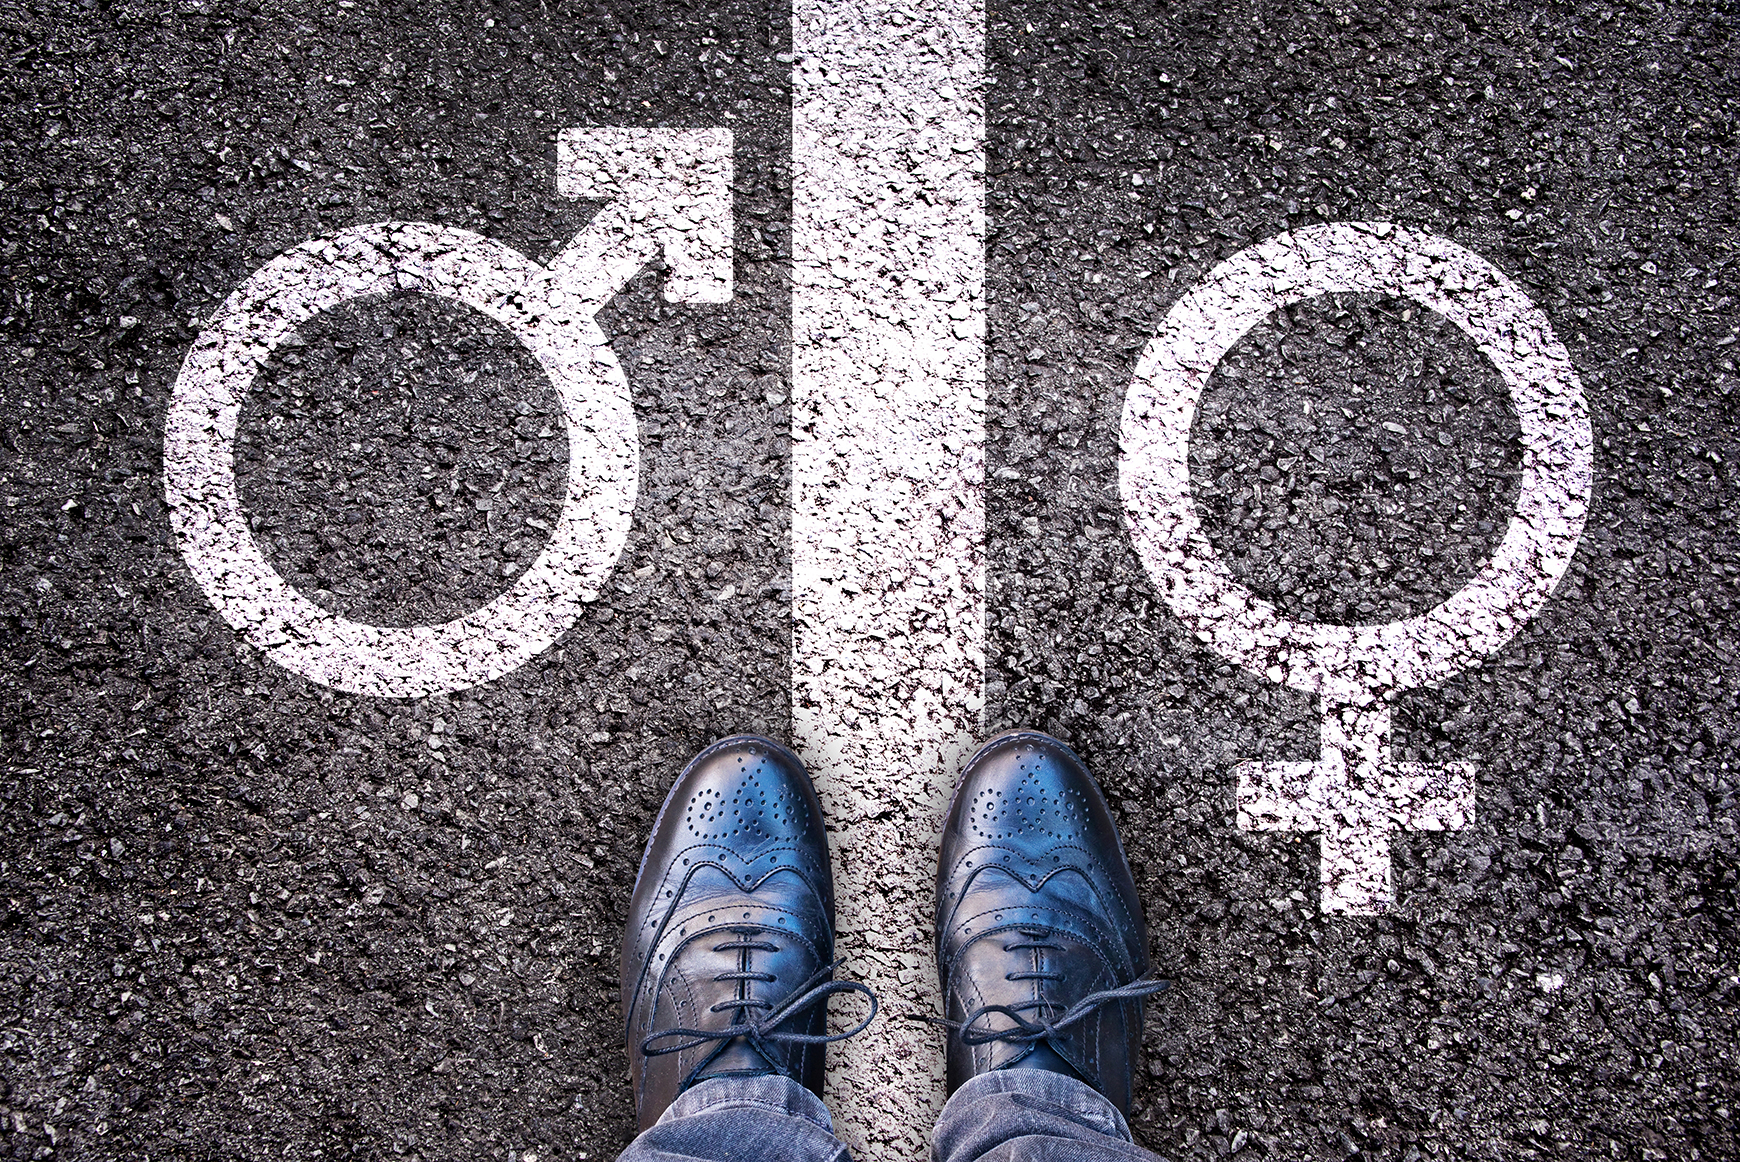 5 Things Every Christian Must Know About the Transgender Debate